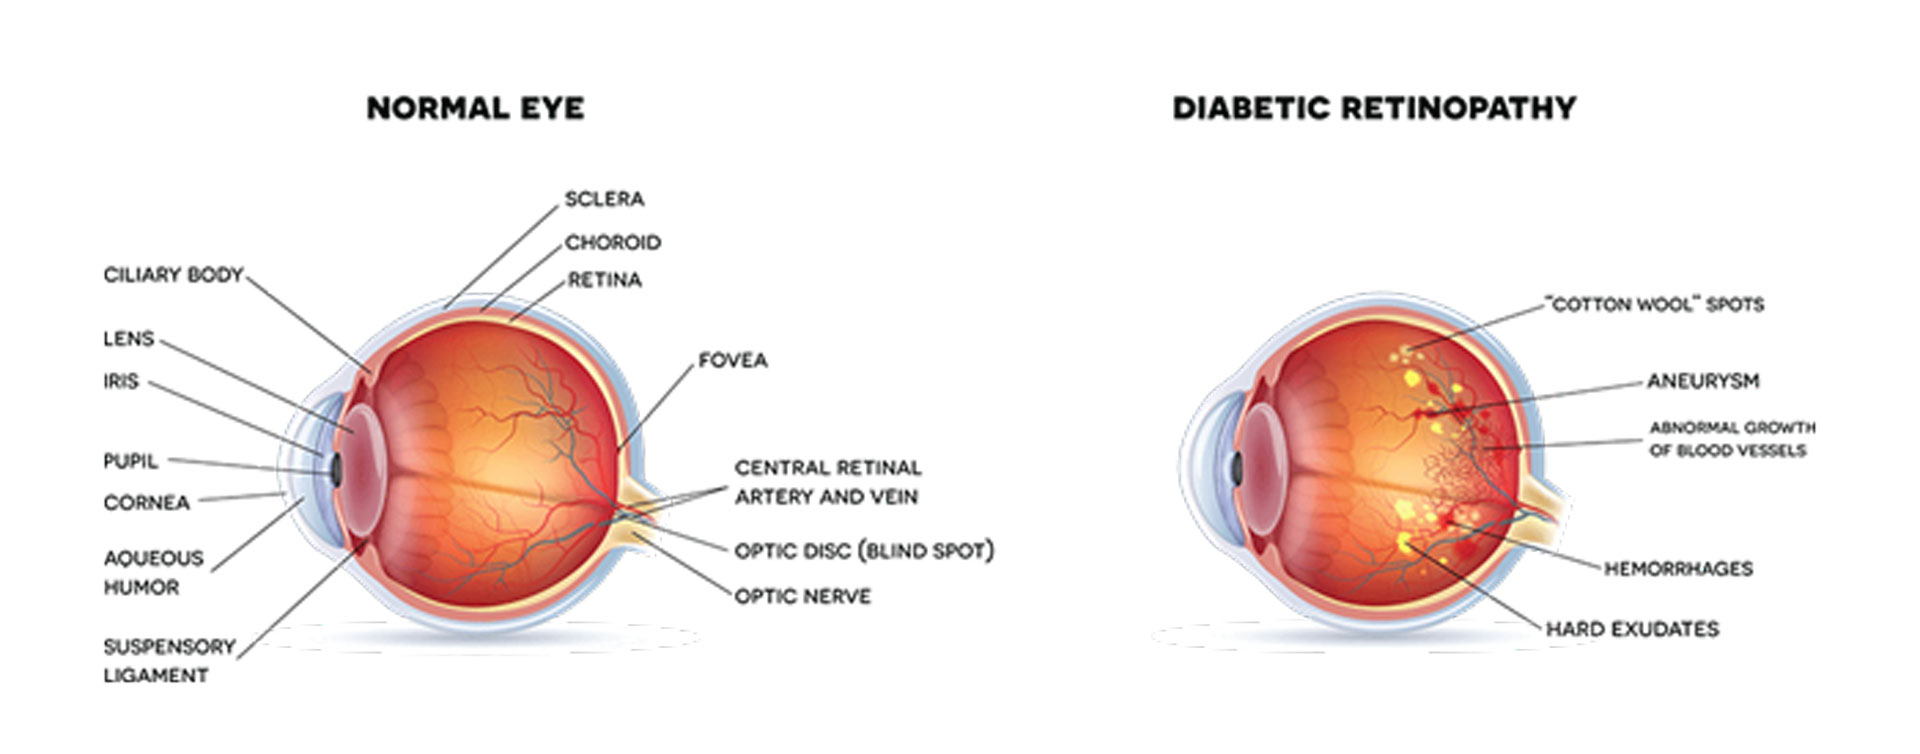 Ohio Ophthalmology Diabetic Retinopathy Conditions Treatment